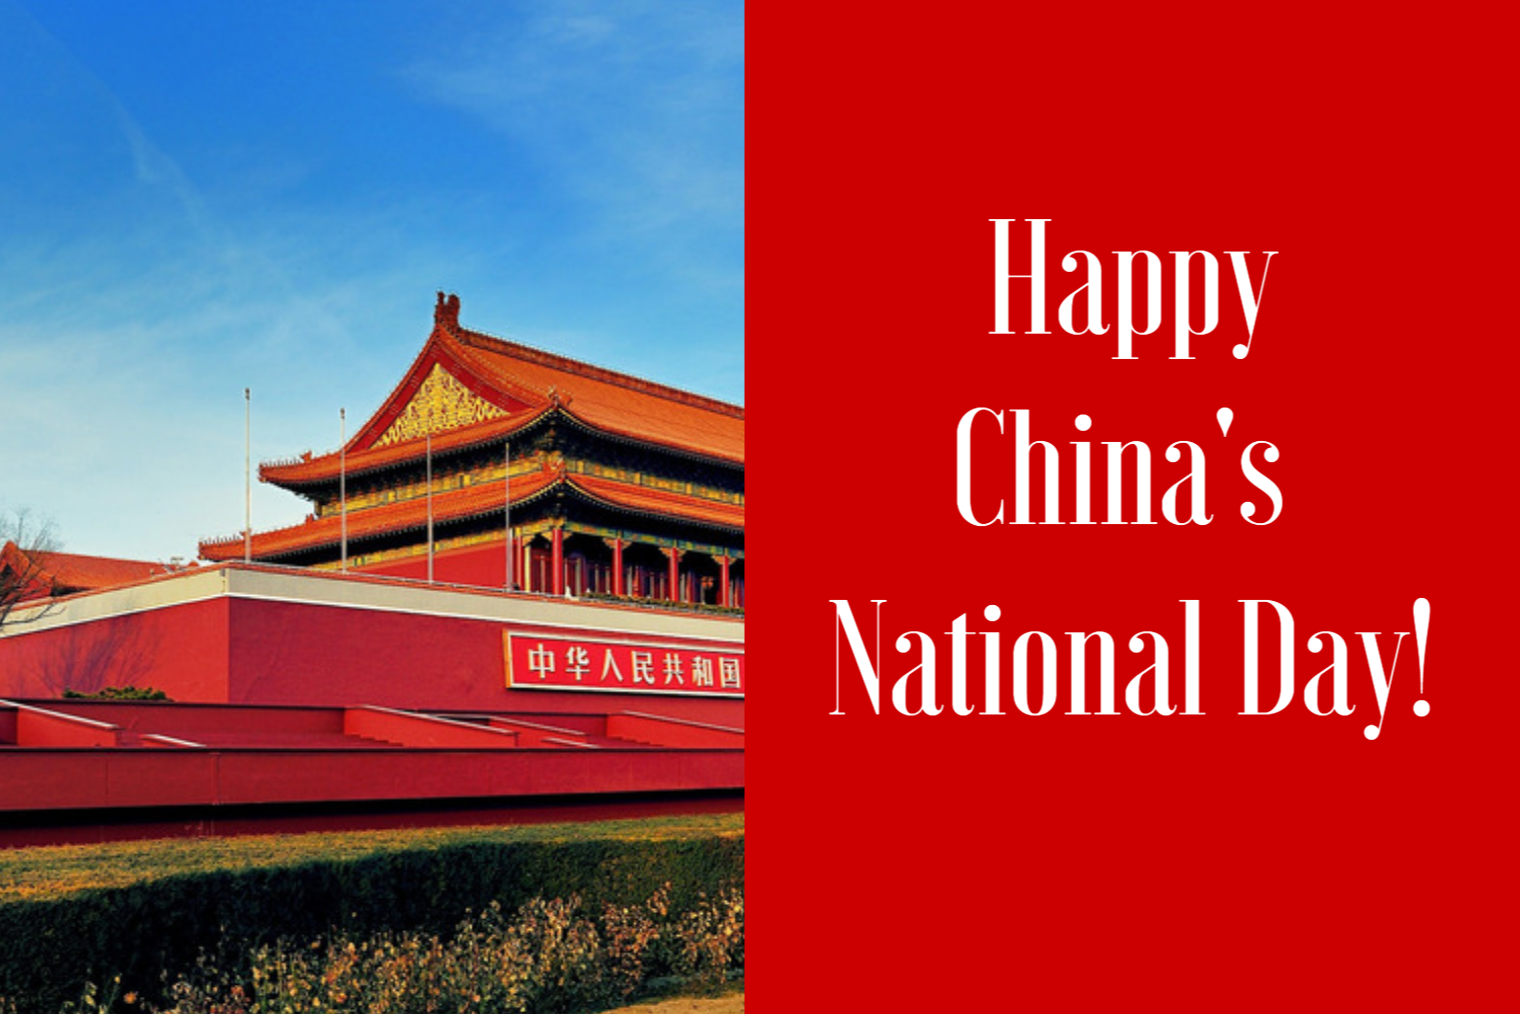 The National Day of the People's Republic of China is coming!